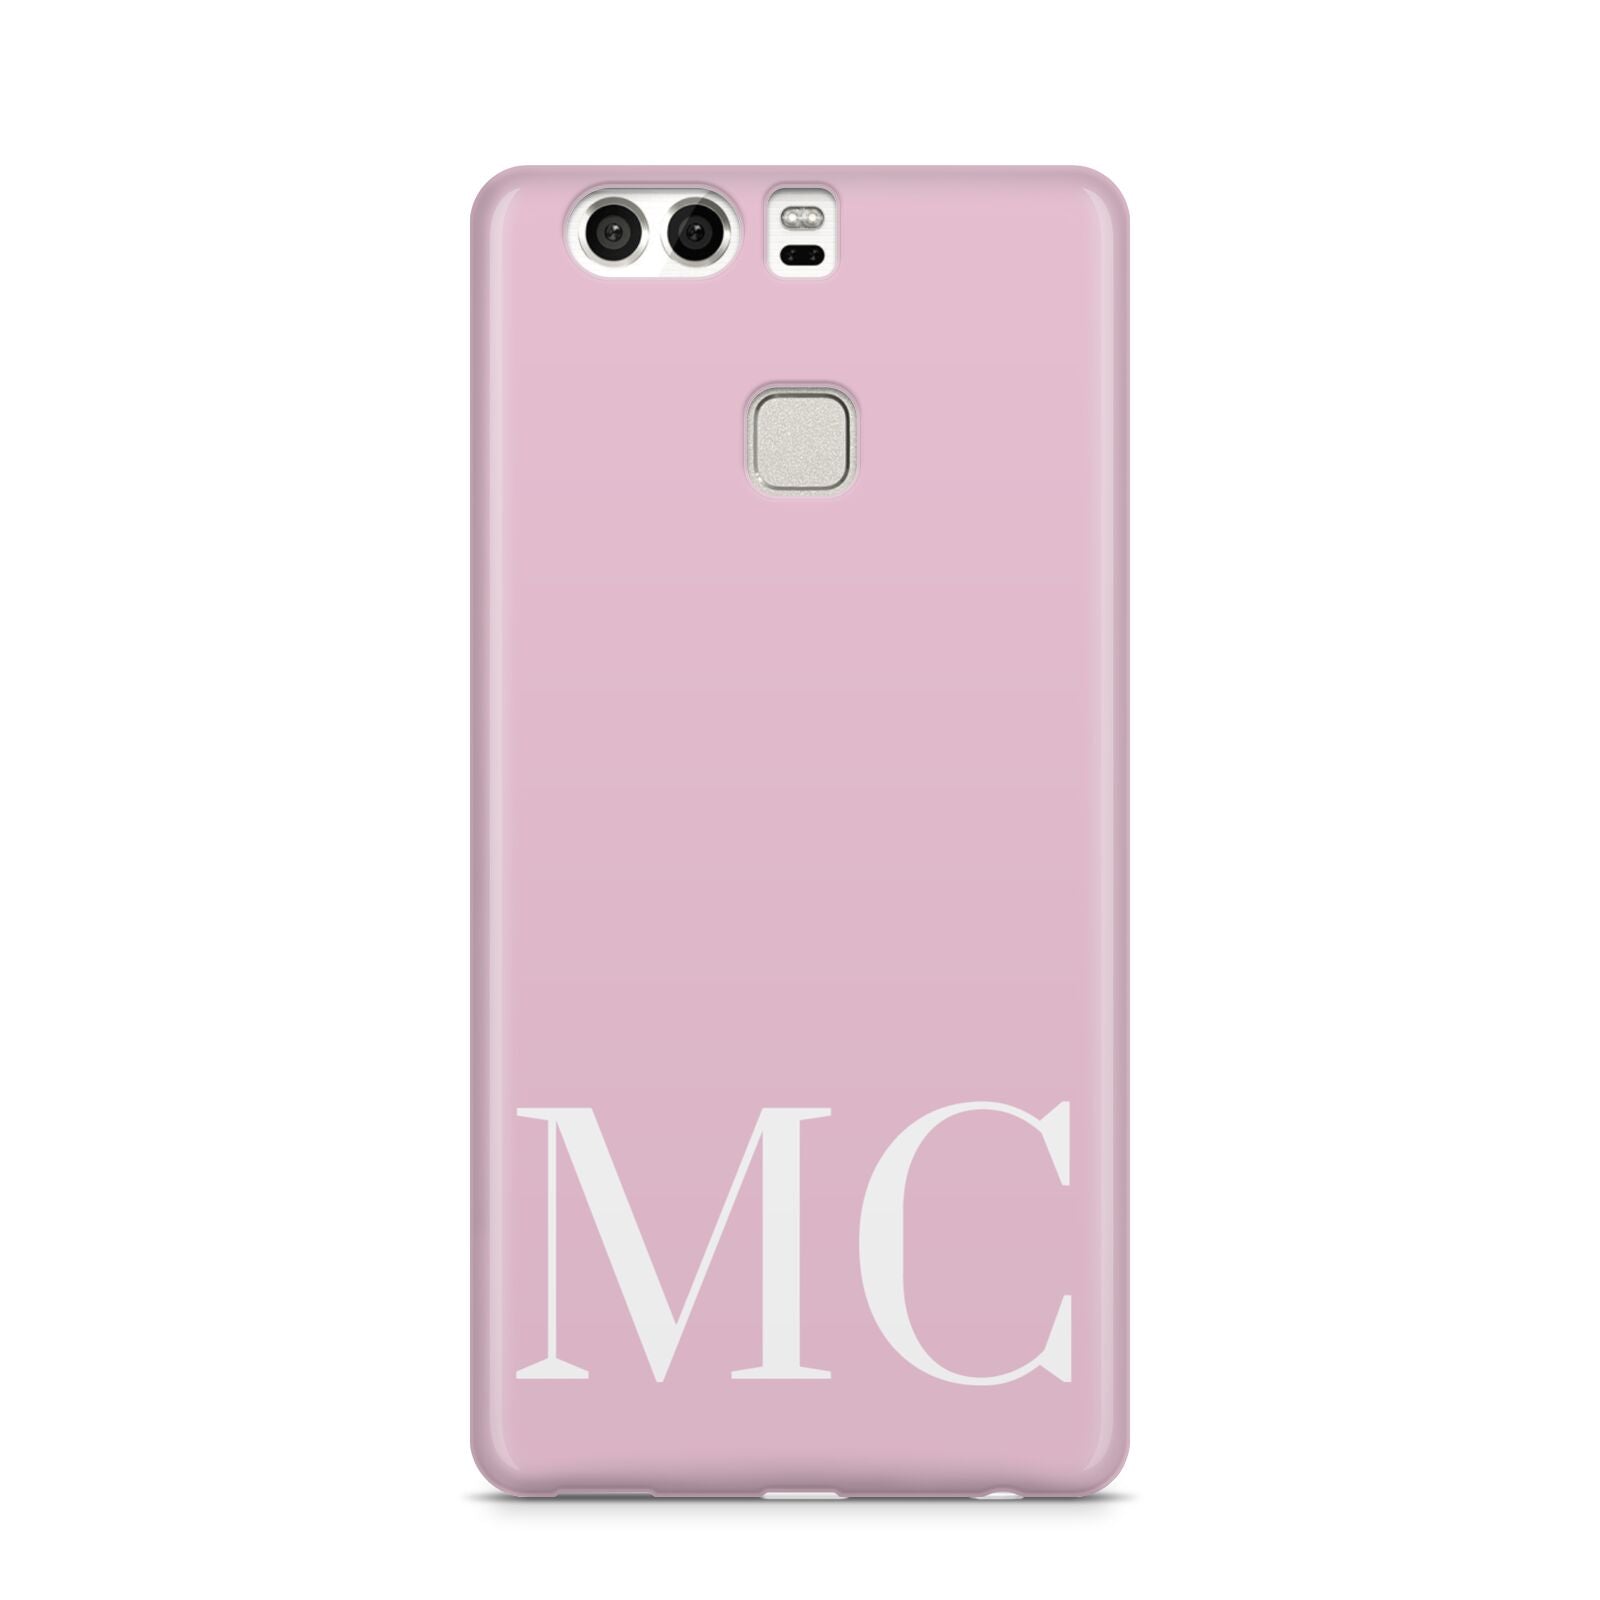 Initials Personalised 2 Huawei P9 Case